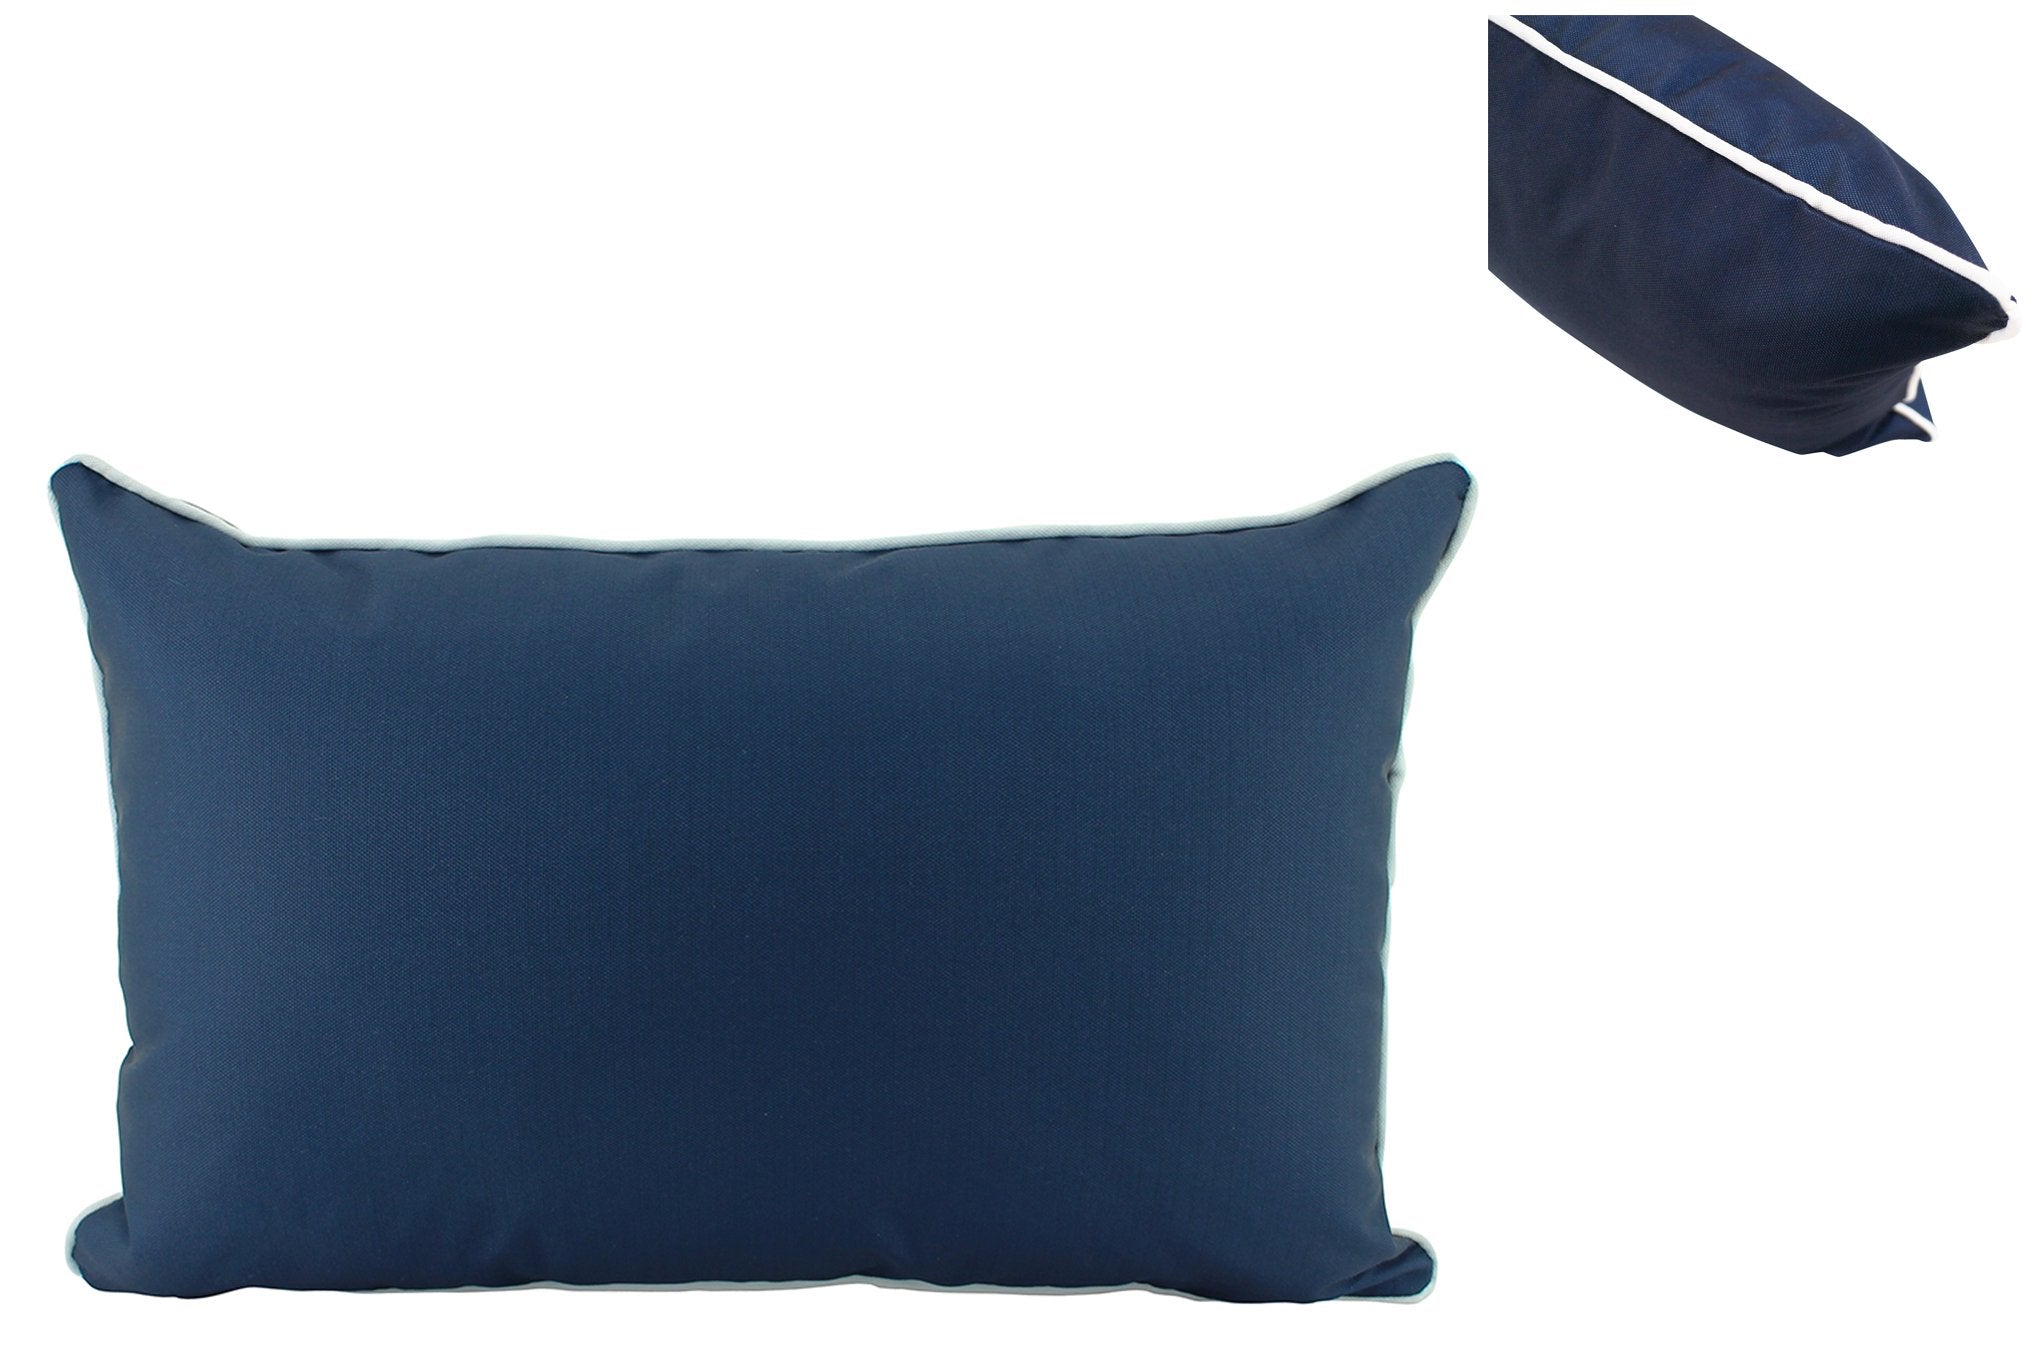 Outdoor Lumbar Cushion, Navy with white piping 50cm x 30cm